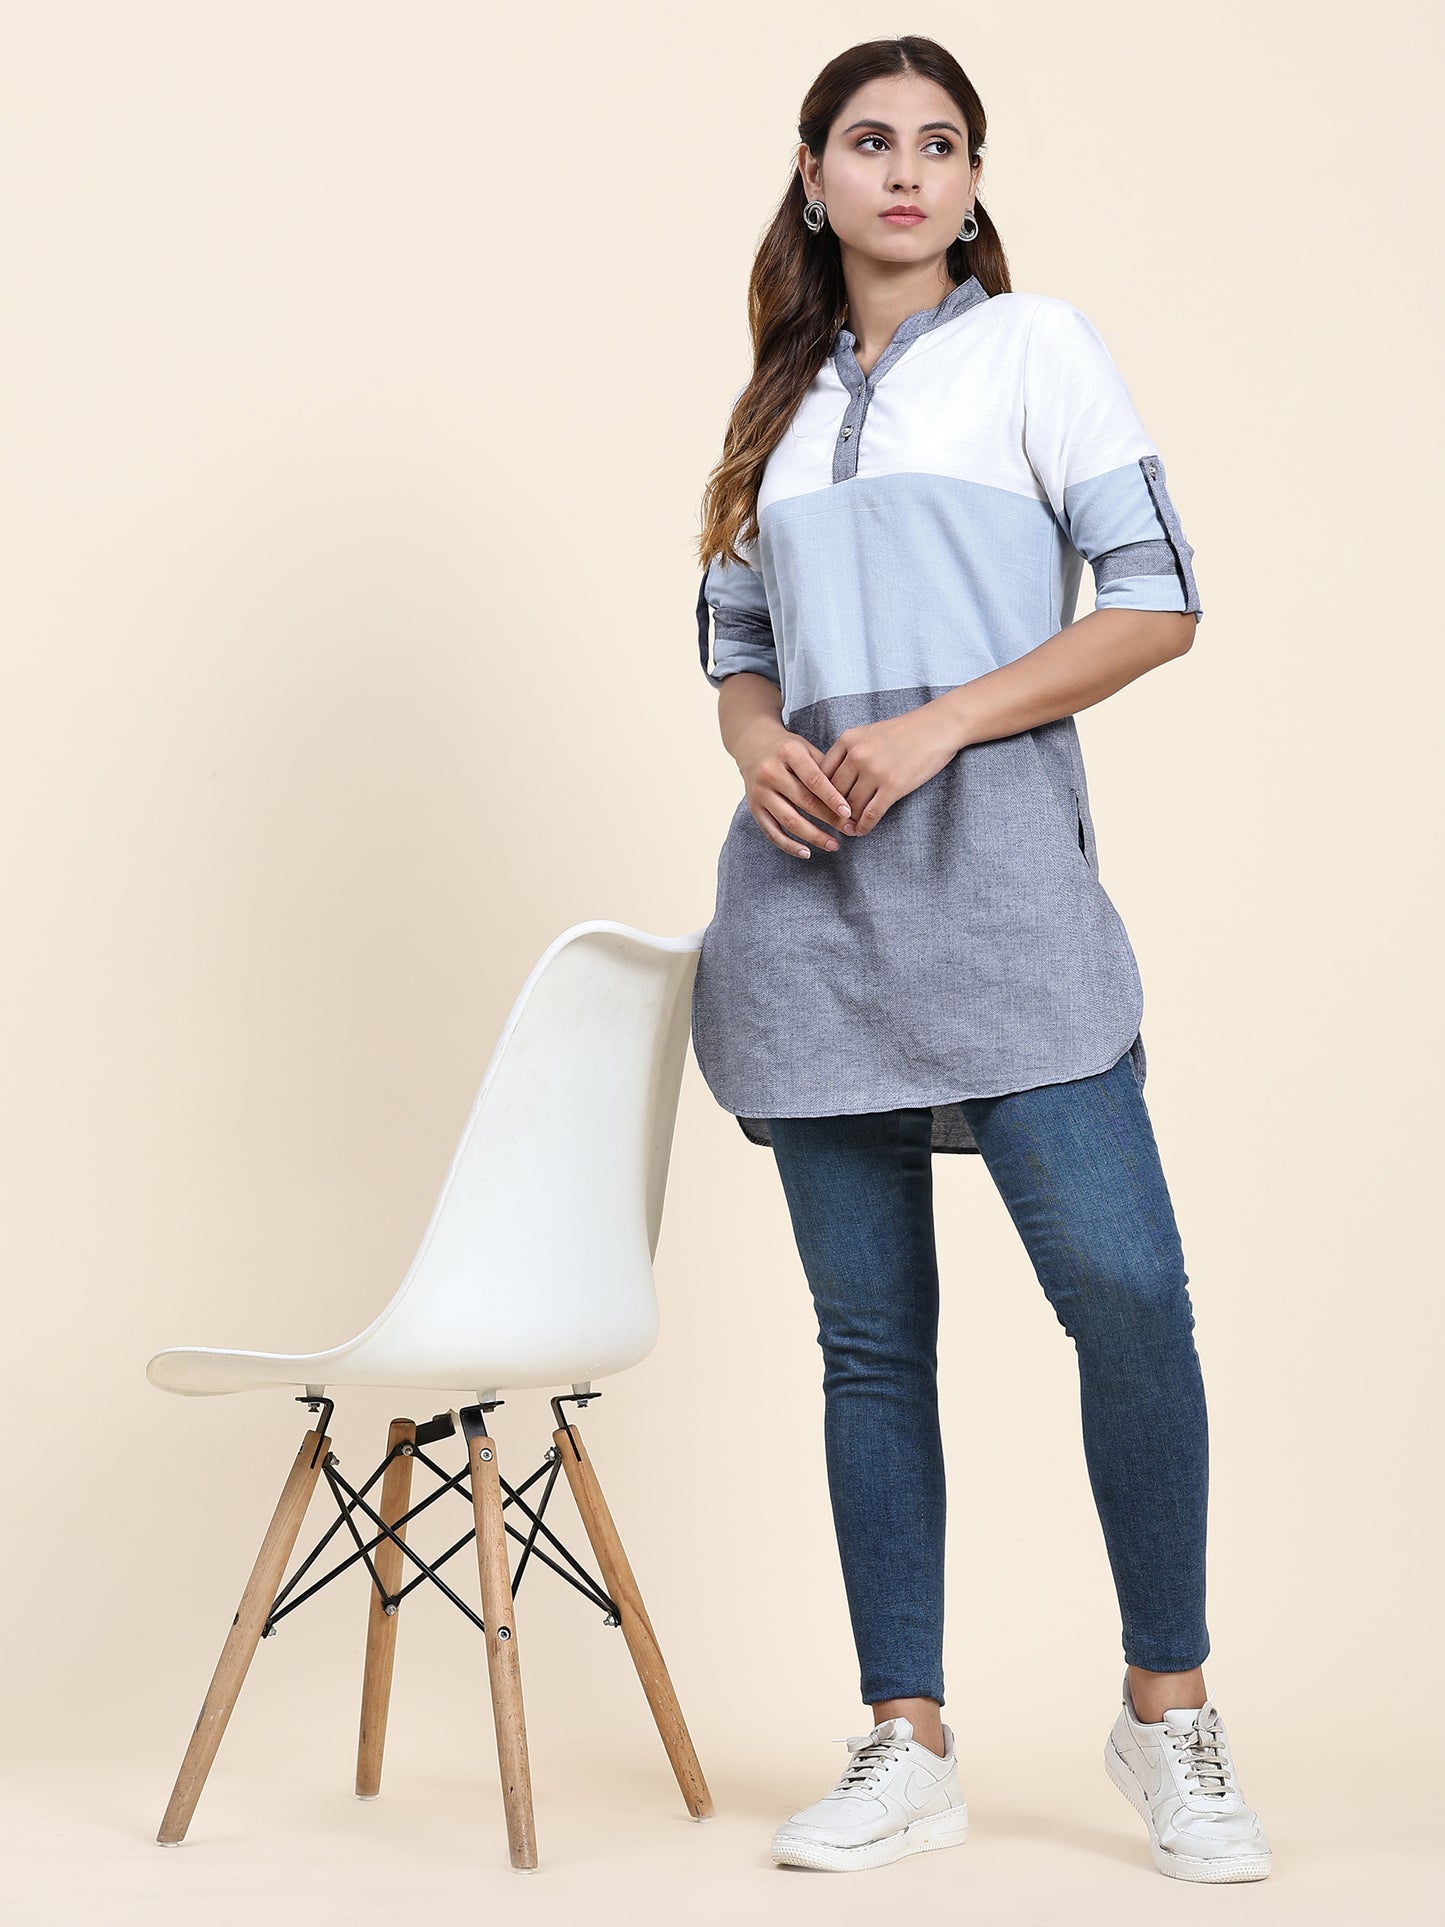 ANUSHIL Women's Cotton Multi Stripe Shirts: Comfortable and Fashionable with V-Neck and Sleeves